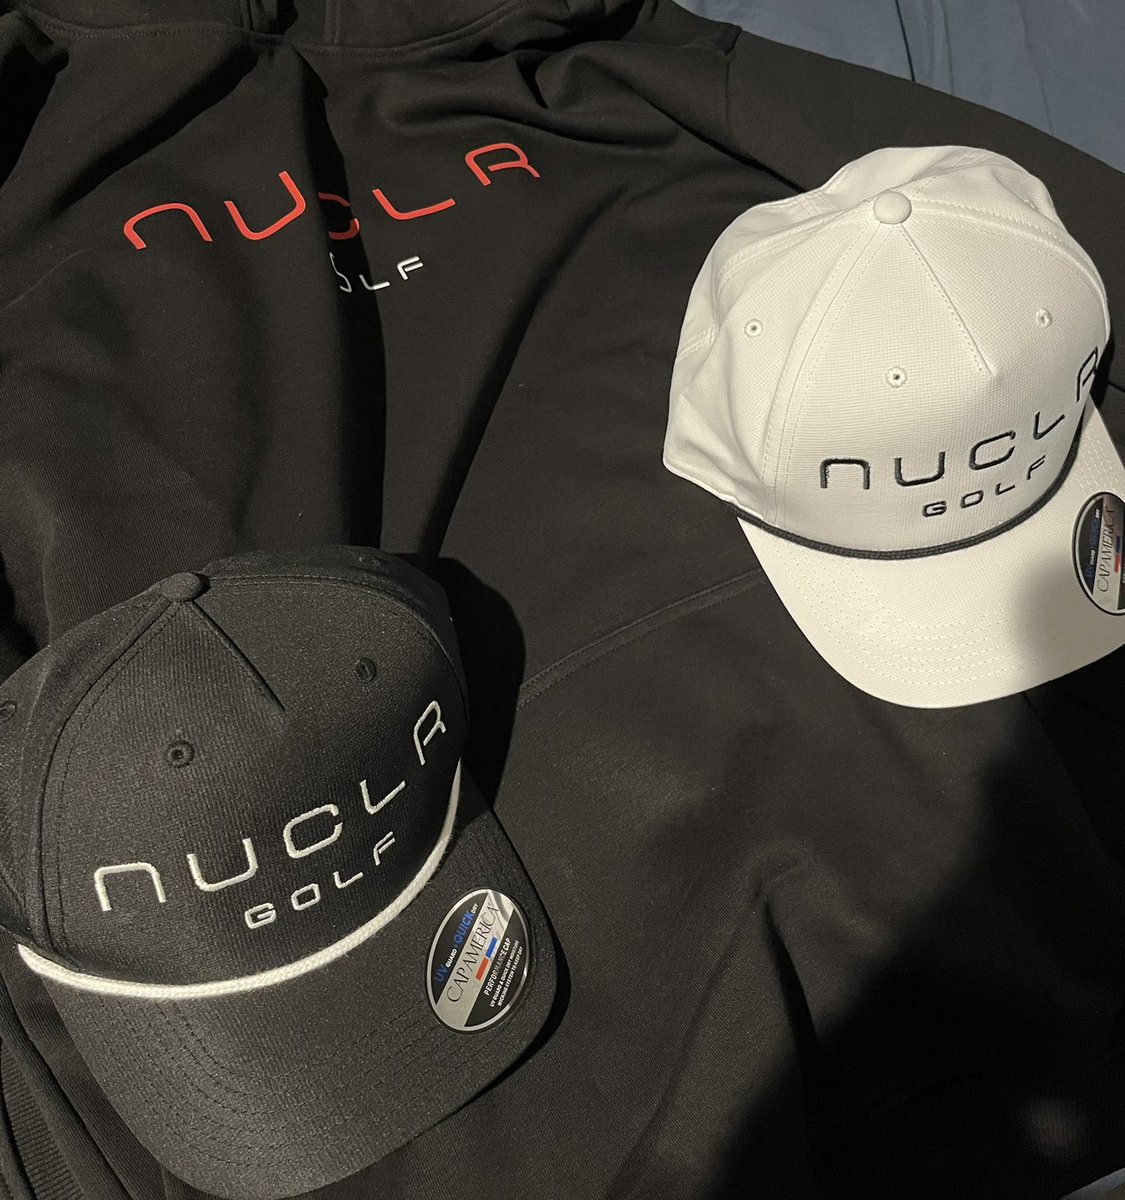 🚨#GIVEAWAY 🧢 — Win a NUCLR GOLF Rope hat! Simply FOLLOW US, LIKE THIS POST and RETWEET for a chance to win! Winner announced tomorrow. Good luck! 🤞